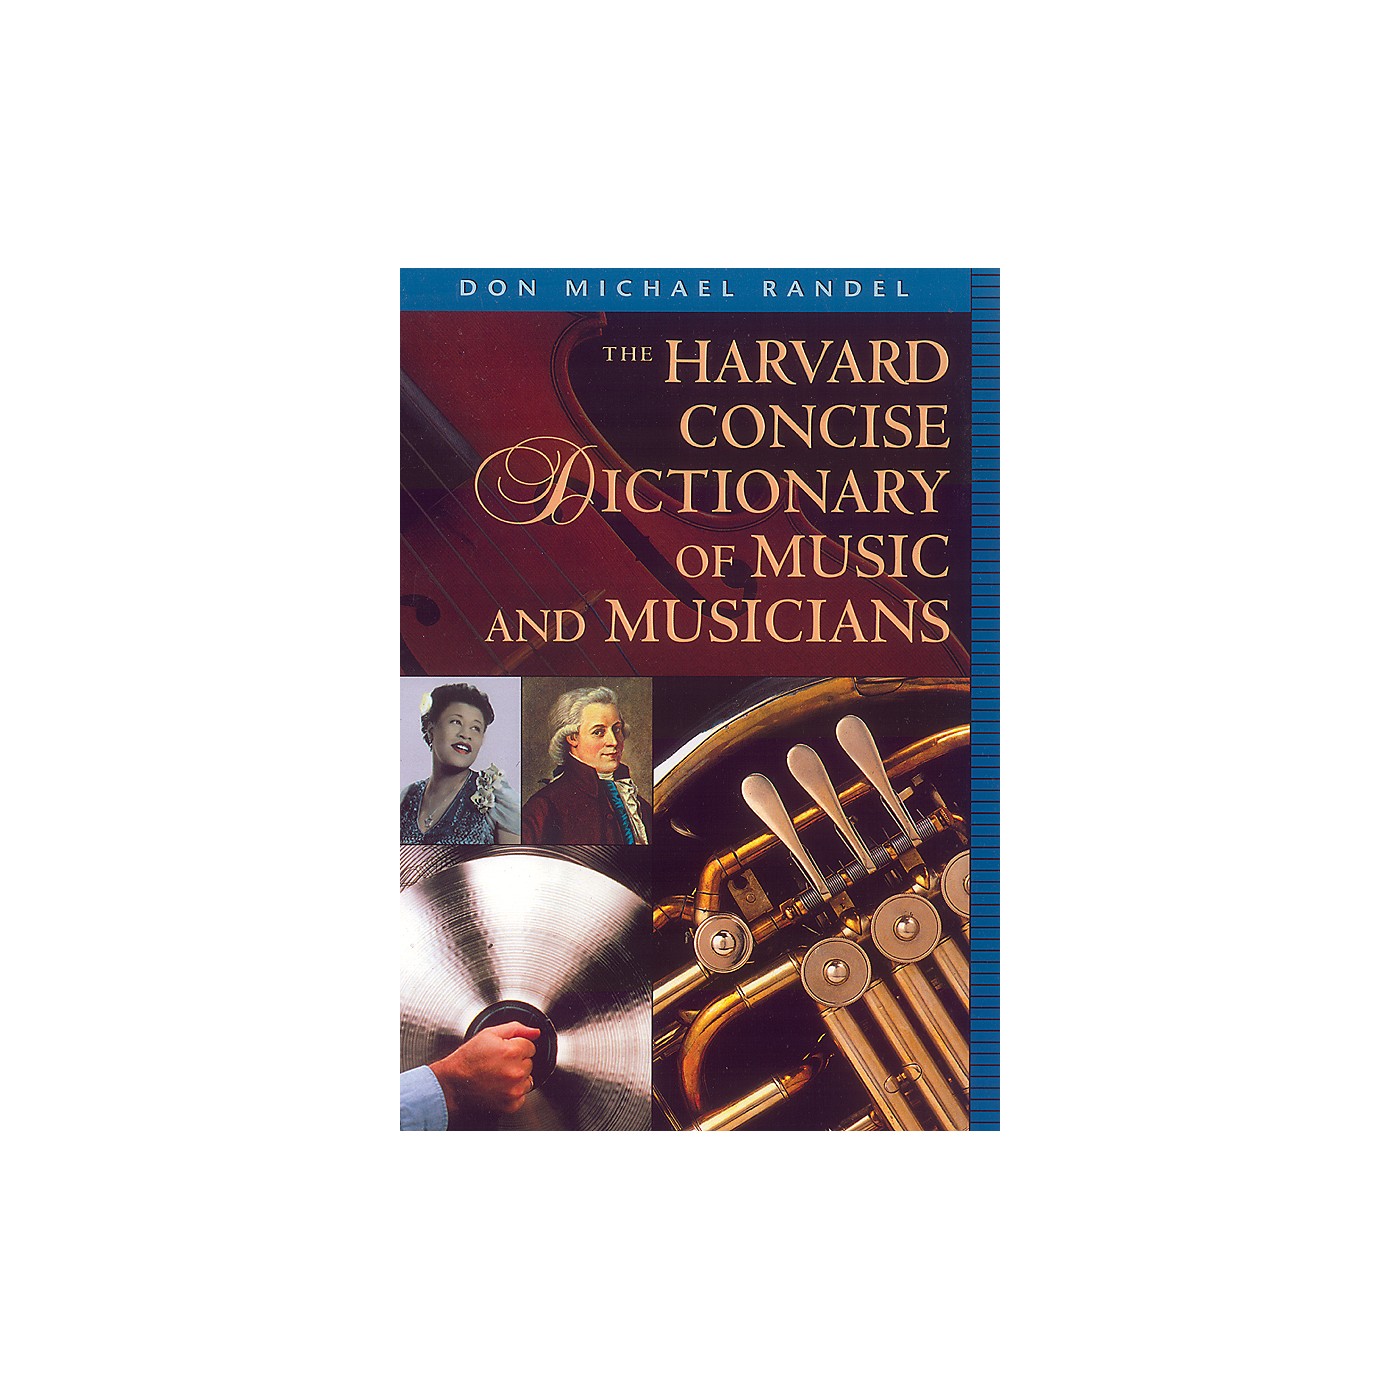 Alfred Harvard Concise Dictionary of Music and Musicians 9